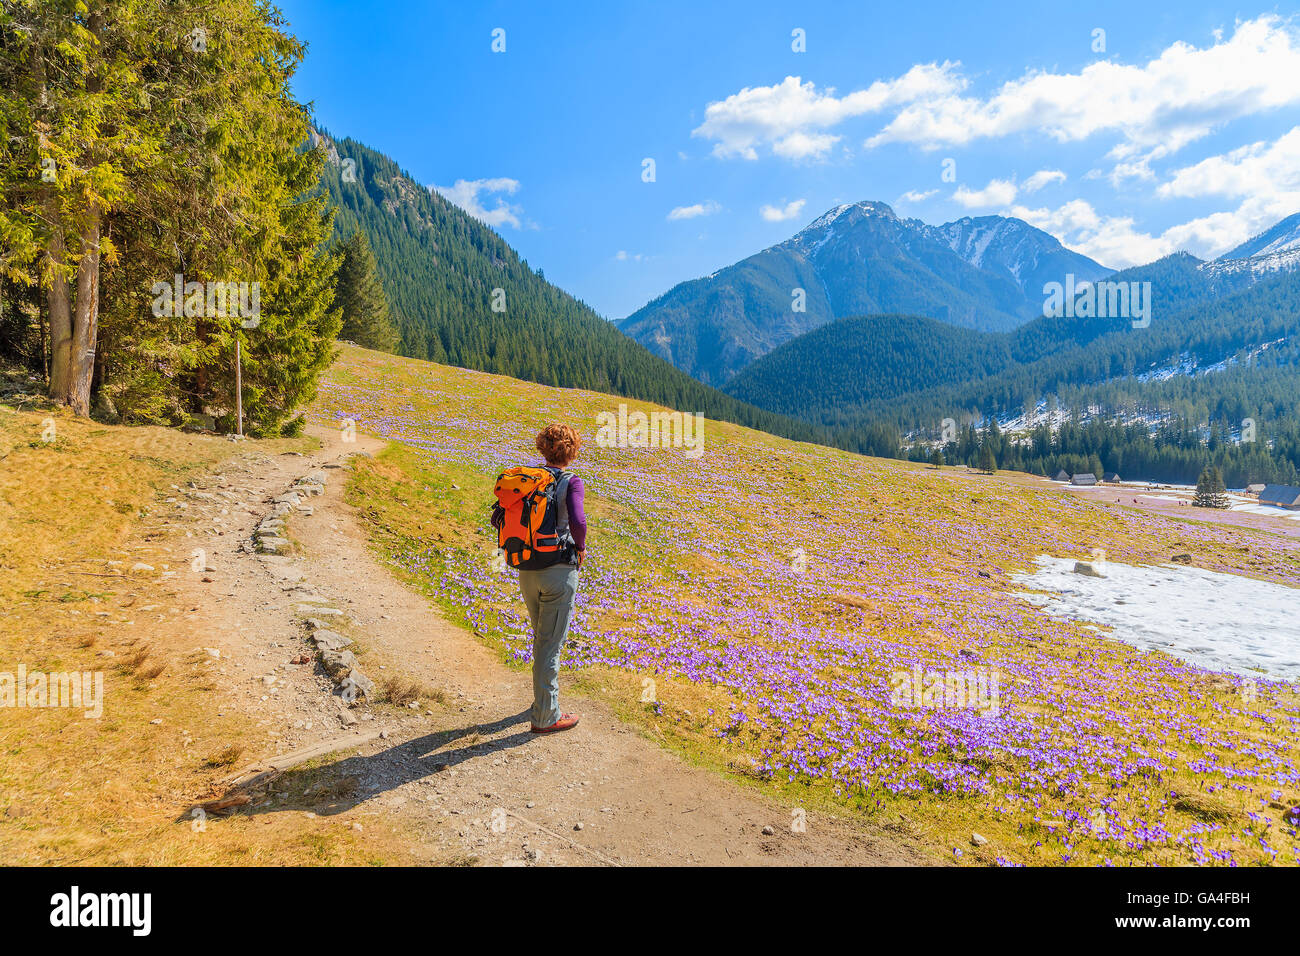 Young woman tourist standing on pasture with blooming crocus flowers in Chocholowska valley, Tatra Mountains, Poland Stock Photo